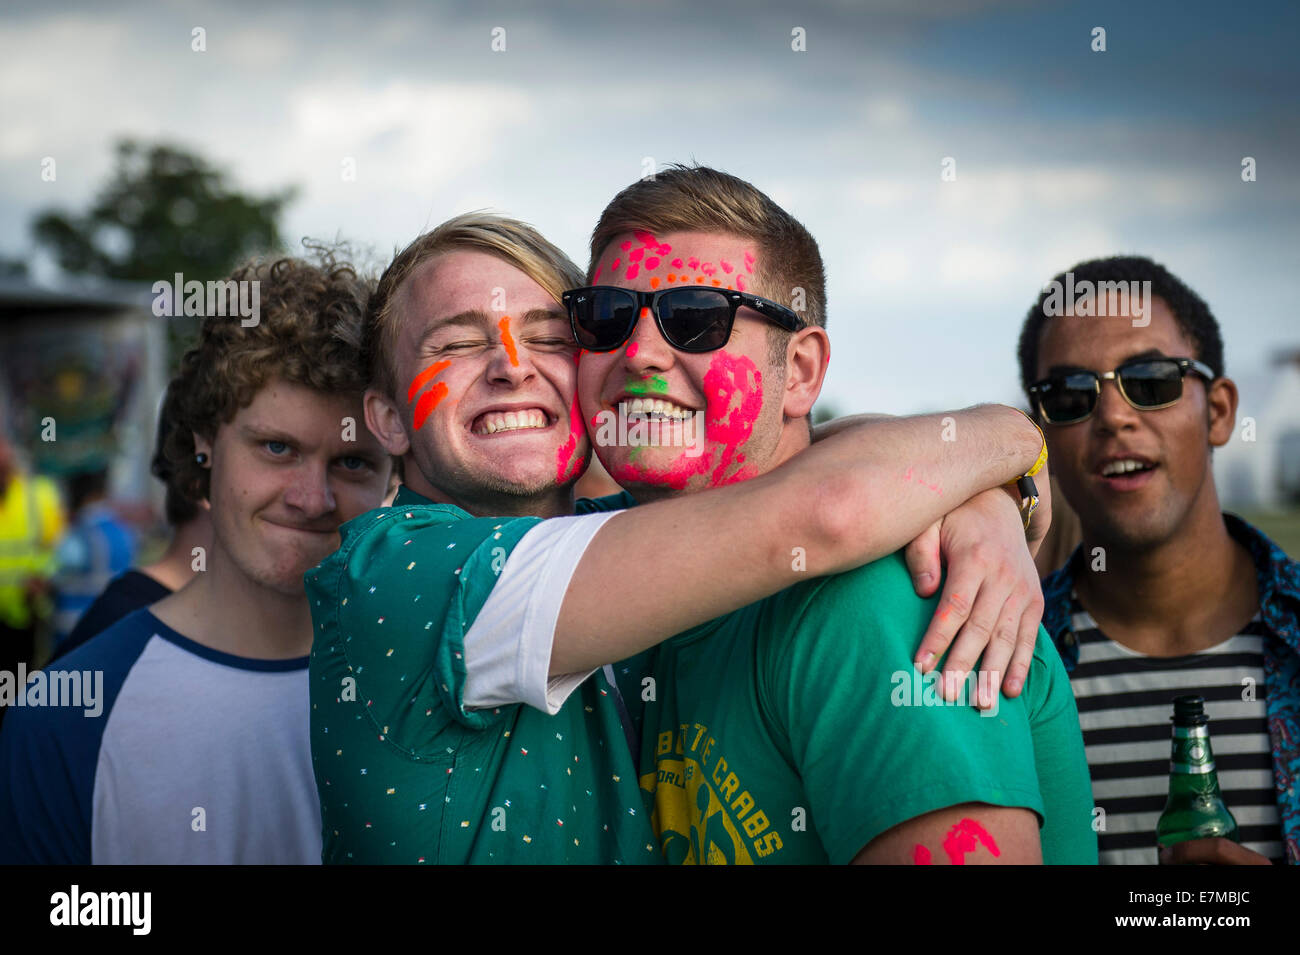 Festivalgoers at the Brownstock Music Festival in Essex. Stock Photo